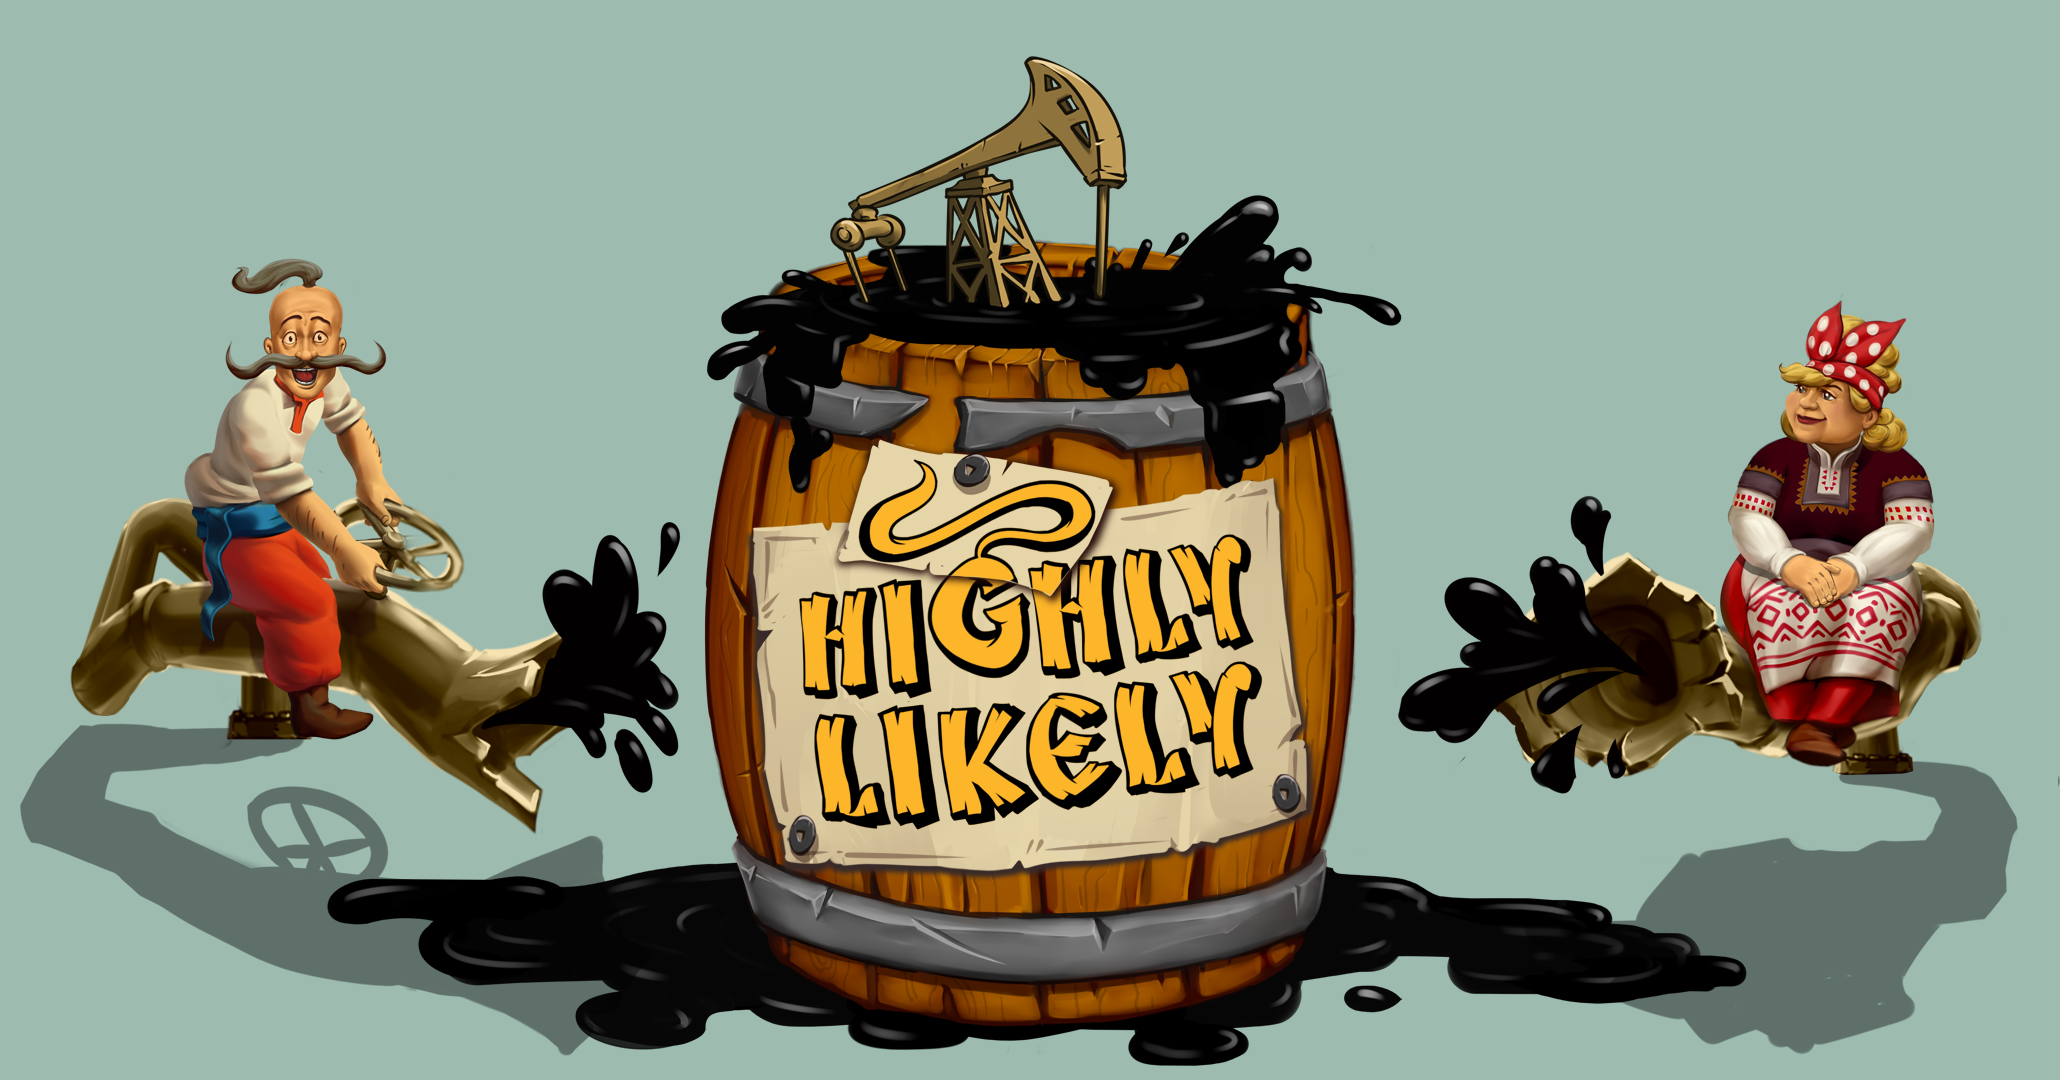 Highly likely игра. Highly likely Adventure. Картинка highly. Хайли-лайкли карикатура. Likely best